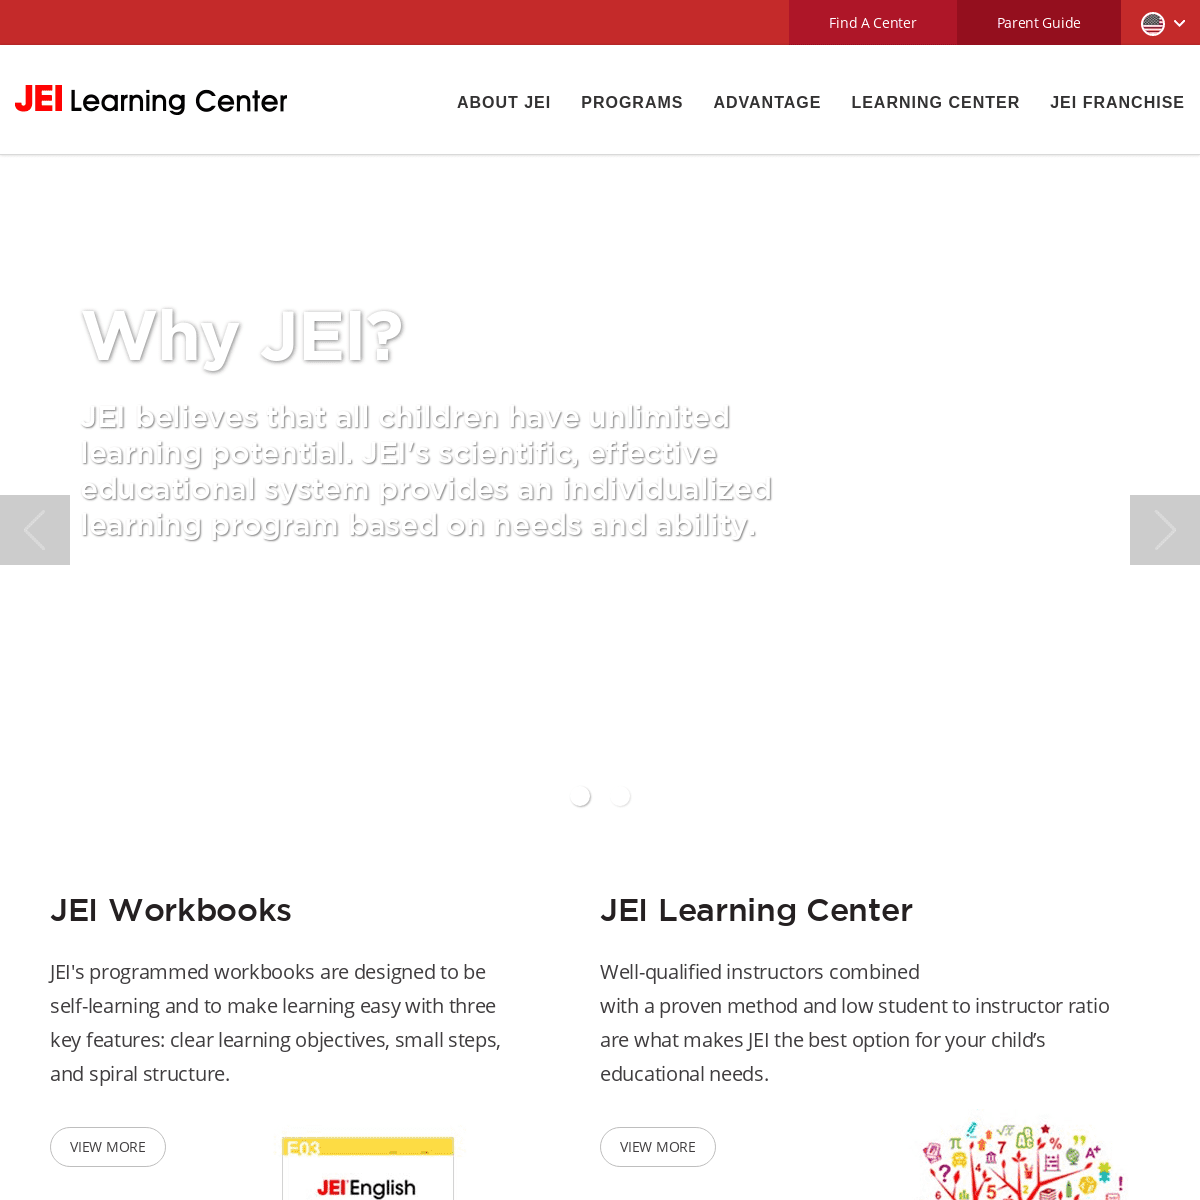 A complete backup of https://jeilearning.com